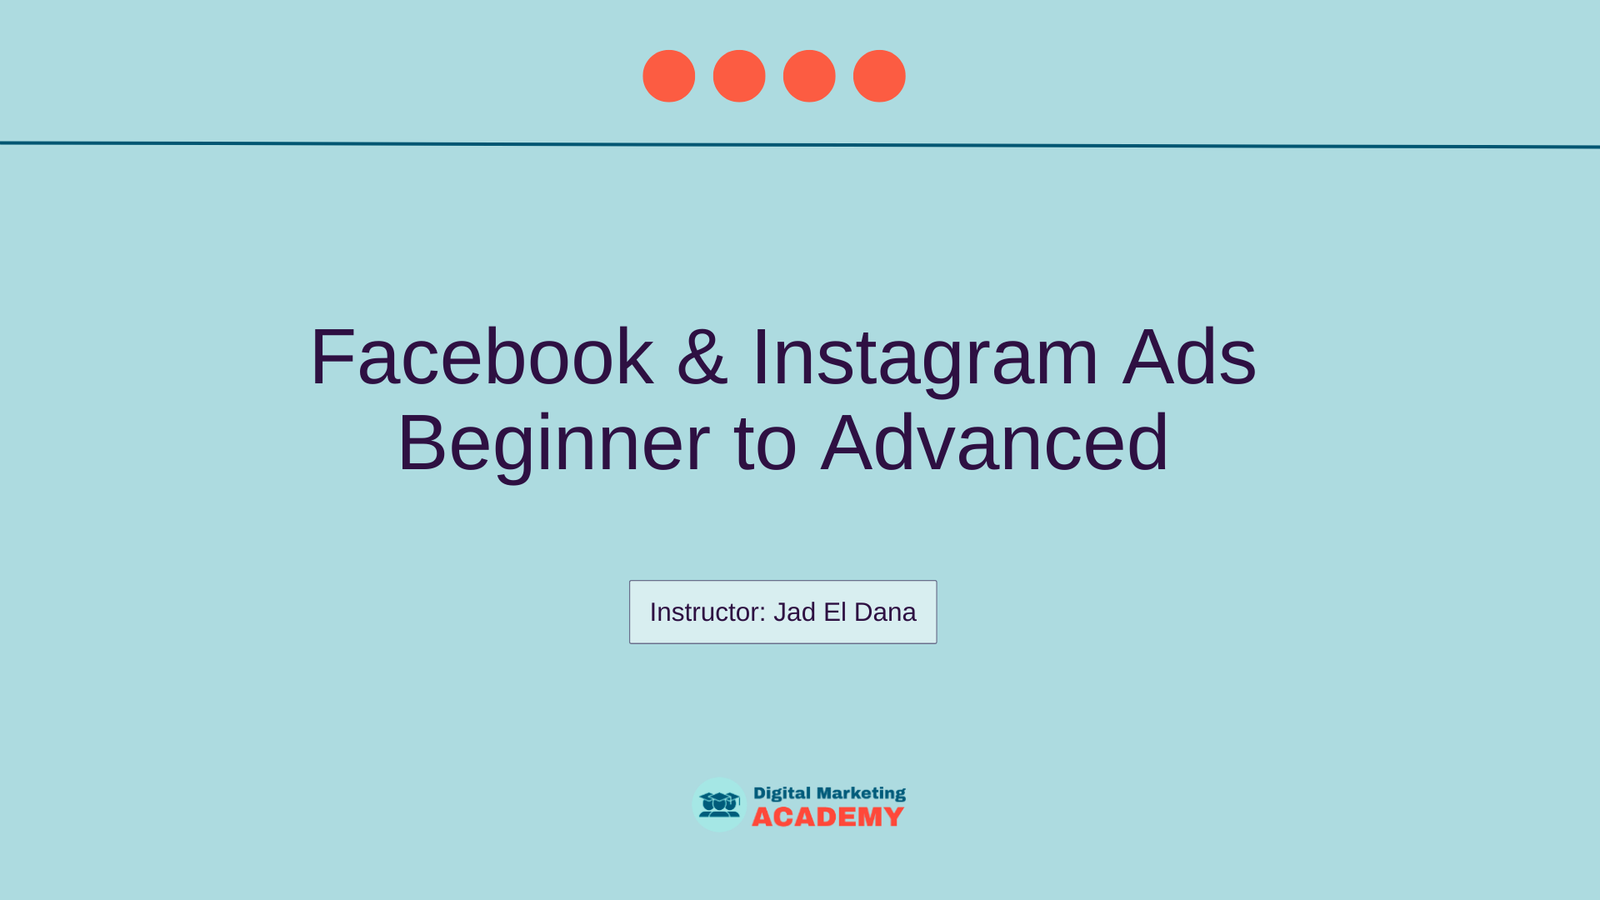 Facebook & Instagram Ads for Ecommerce: Complete Beginner to Advanced Course